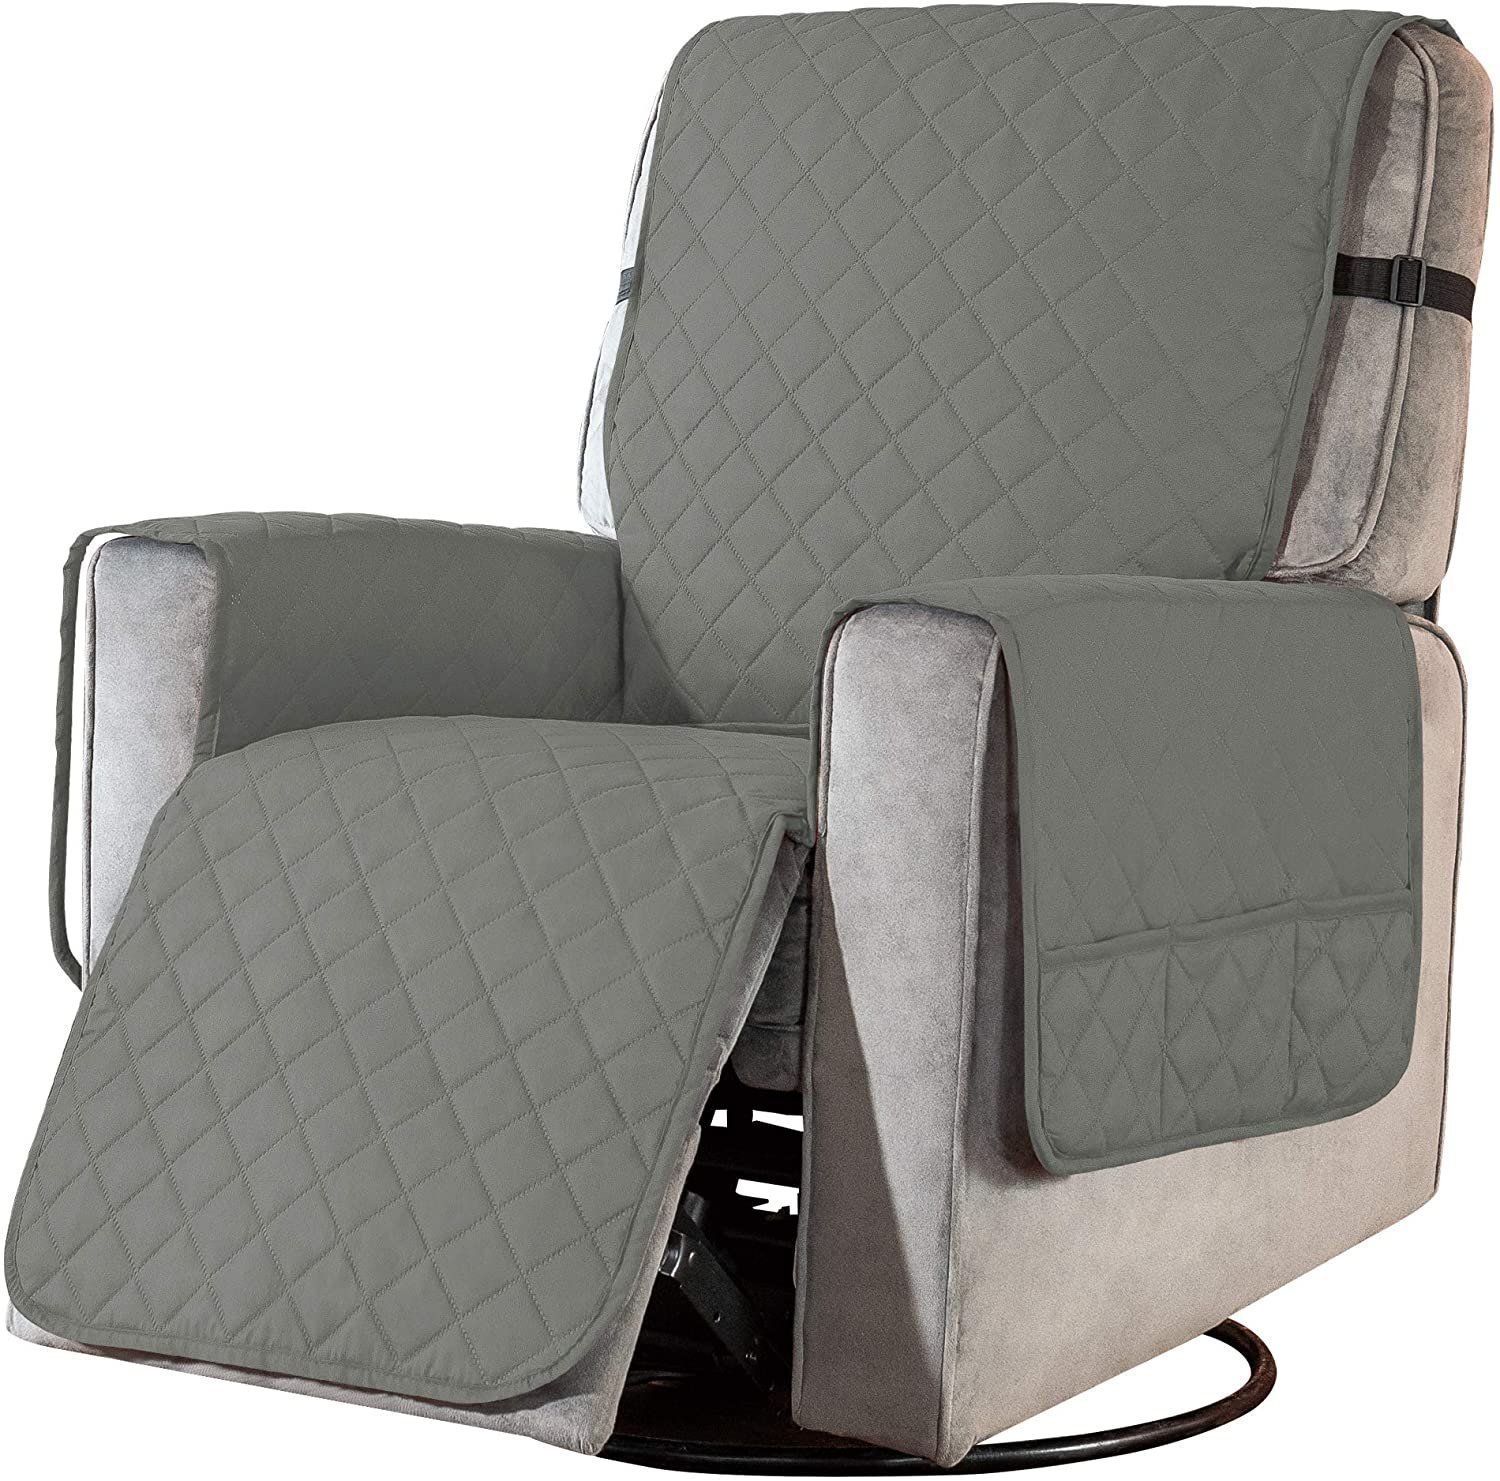 🔥 Last Day Promotion 75% OFF-Recliner Chair Cover-🎁BUY 2 GET FREE SHIPPING NOW!